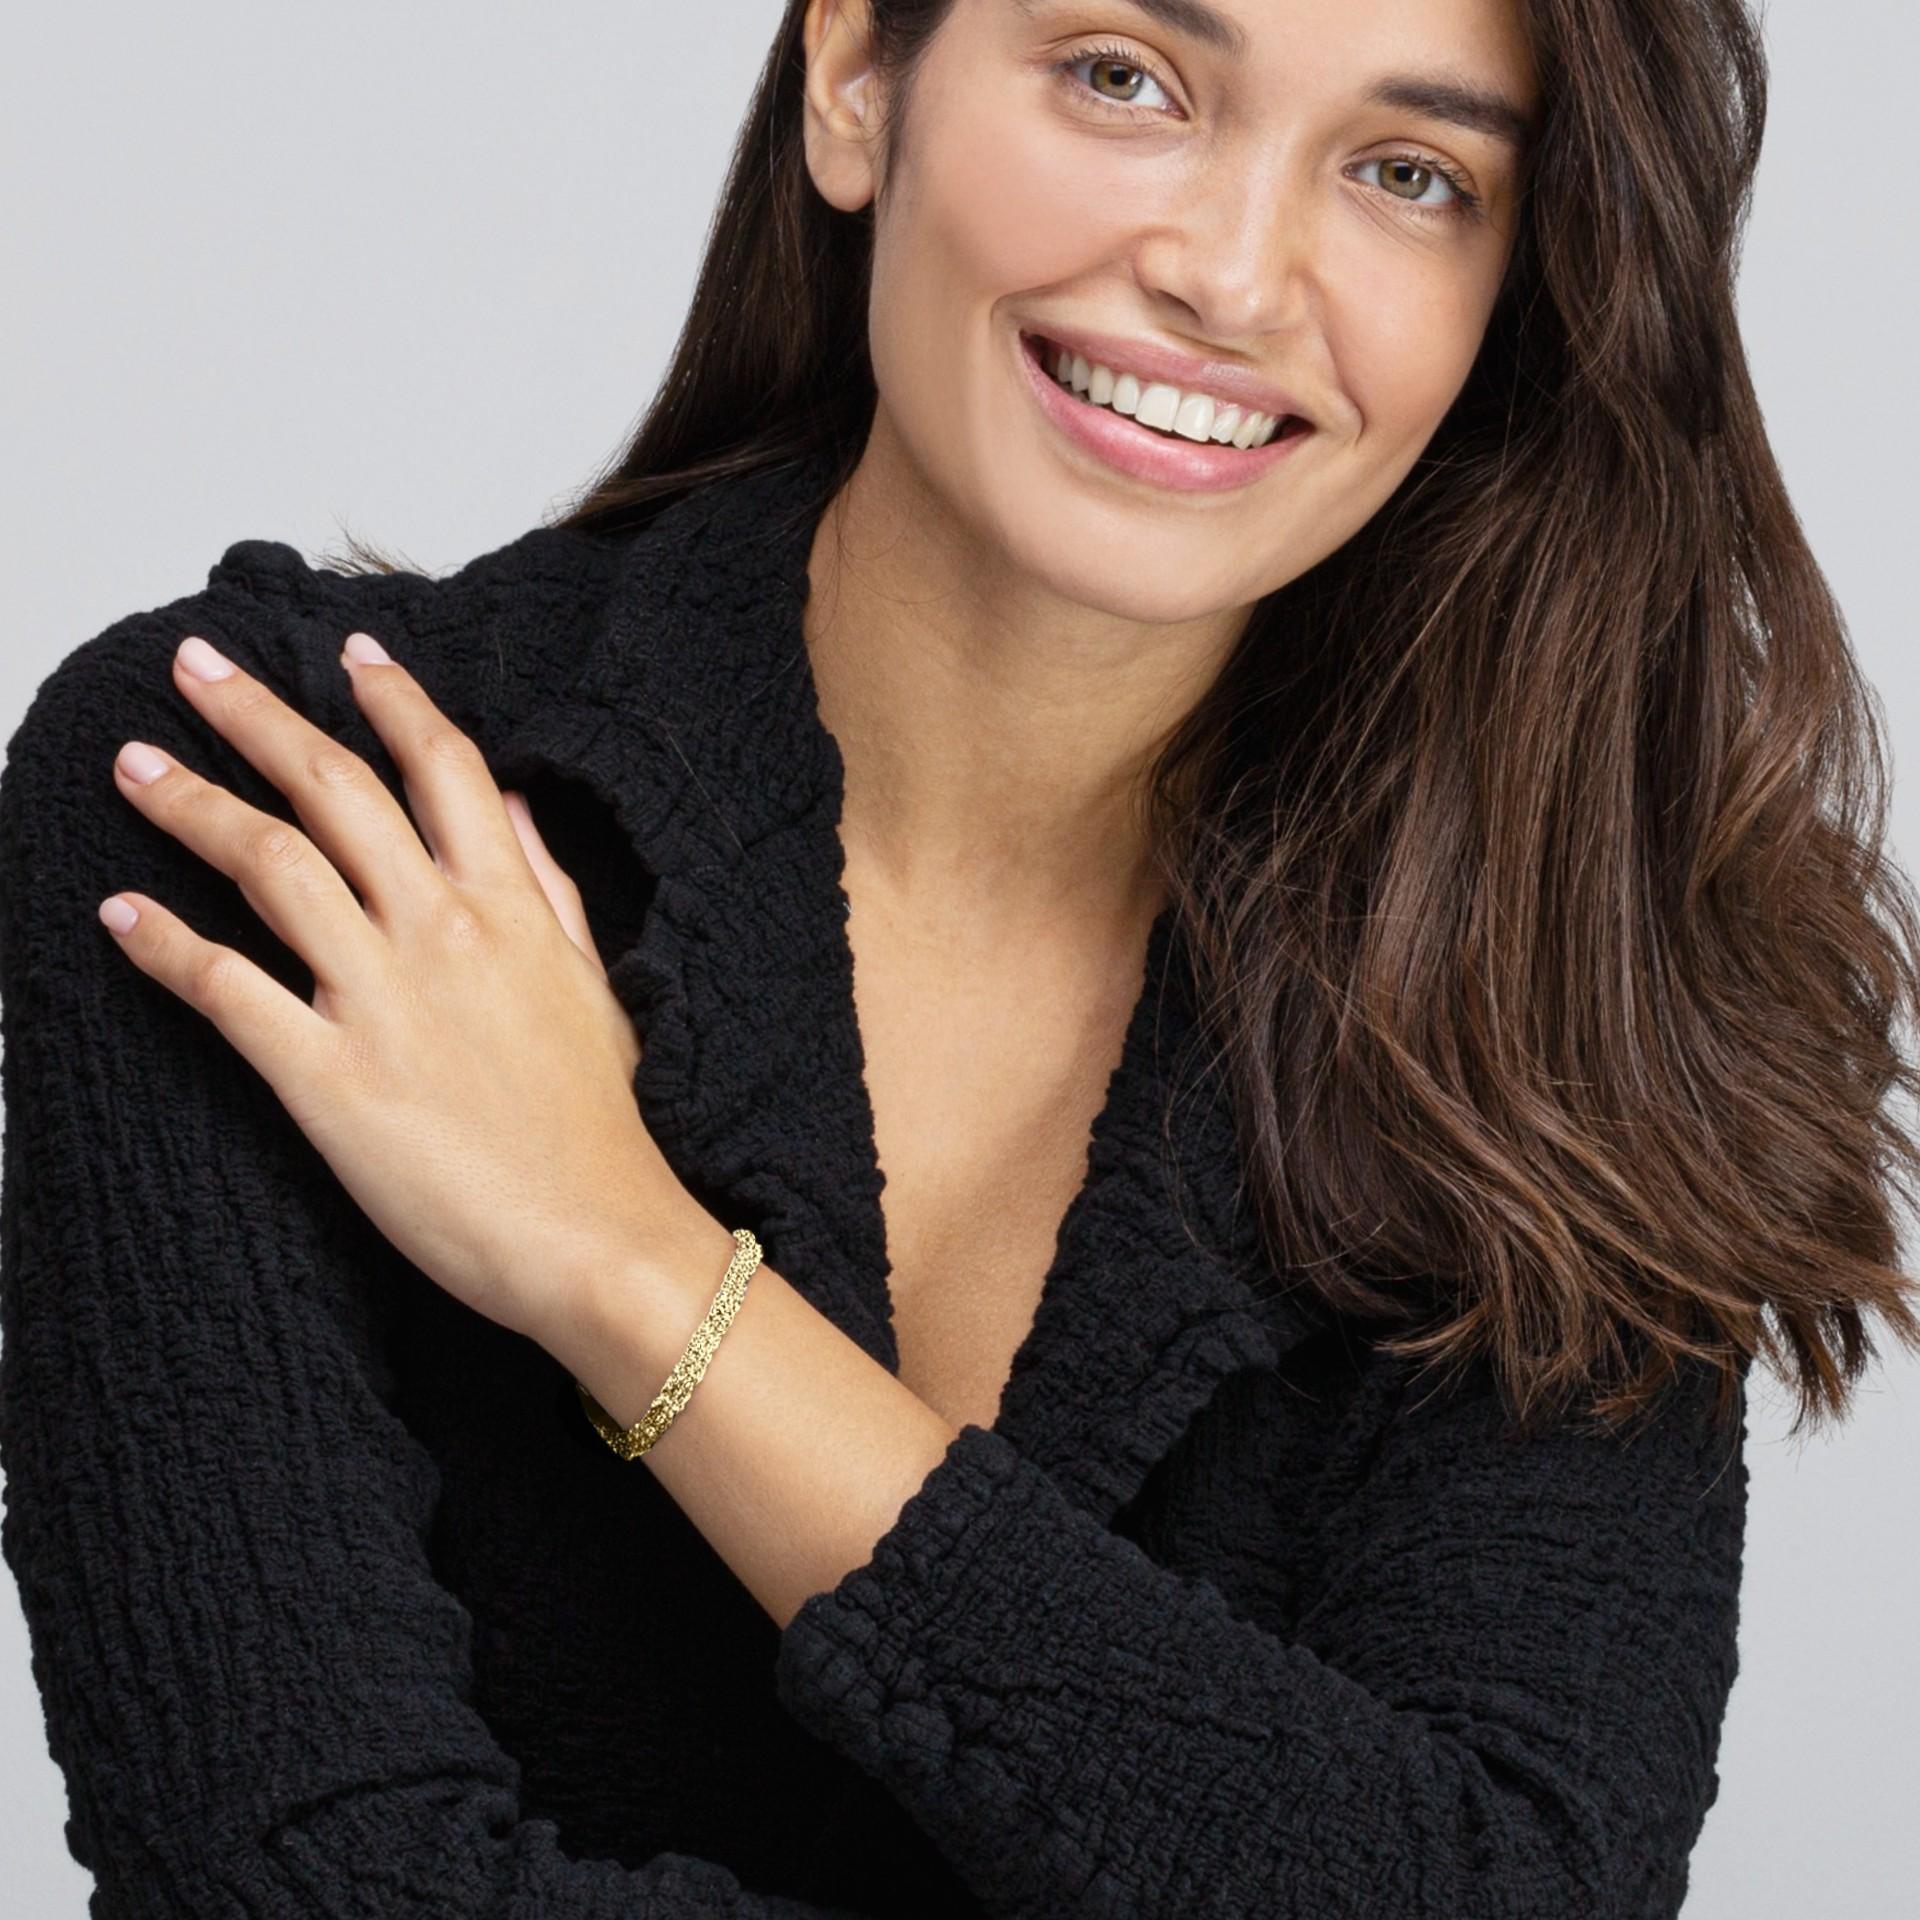 Alex Jona design collection, hand crafted in Italy, gold-plate sterling silver chain bracelet made of woven small chains.
Dimensions : L 7.28 in x D 0.18 in - L 18.5 cm x D 4.70 mm

Alex Jona jewels stand out, not only for their special design and